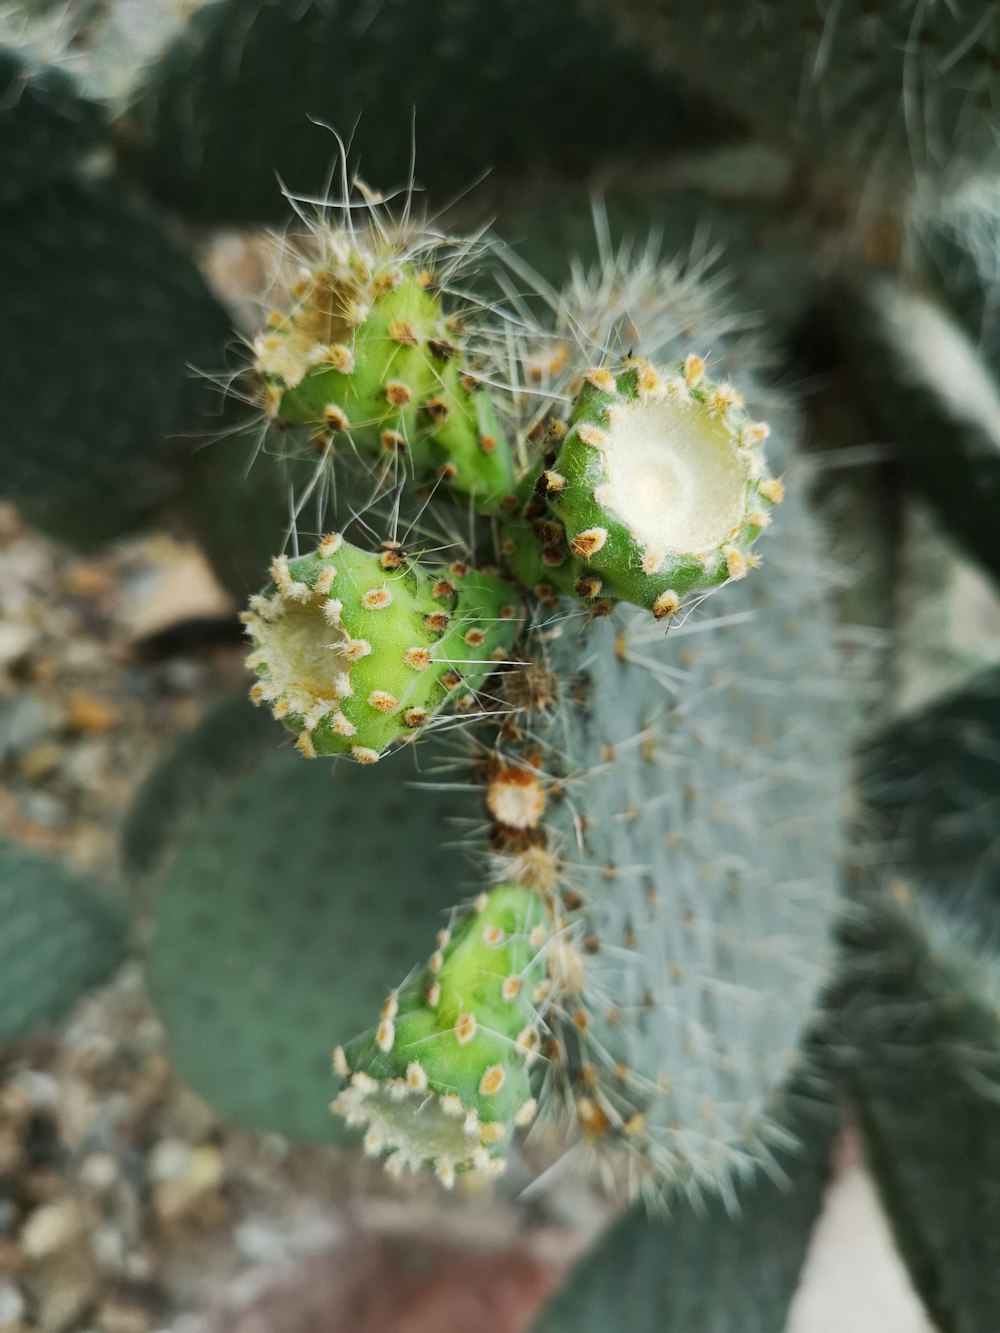 green cactus plants in close-up photo